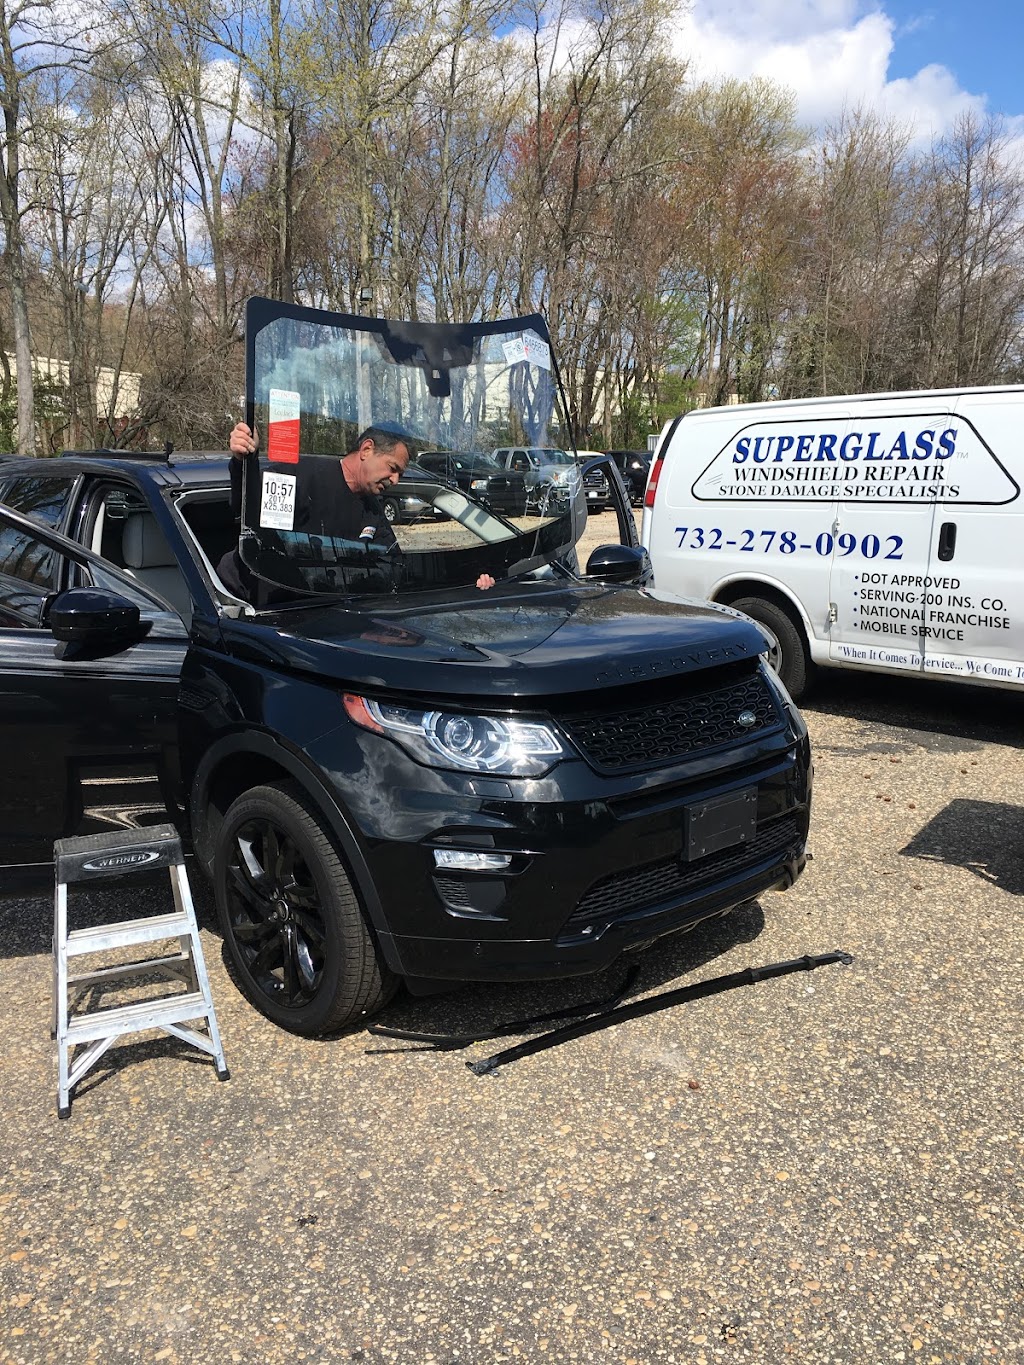 Superglass Windshield Repair and replacement | 5 Canterbury Ct, Jackson Township, NJ 08527 | Phone: (732) 278-0902